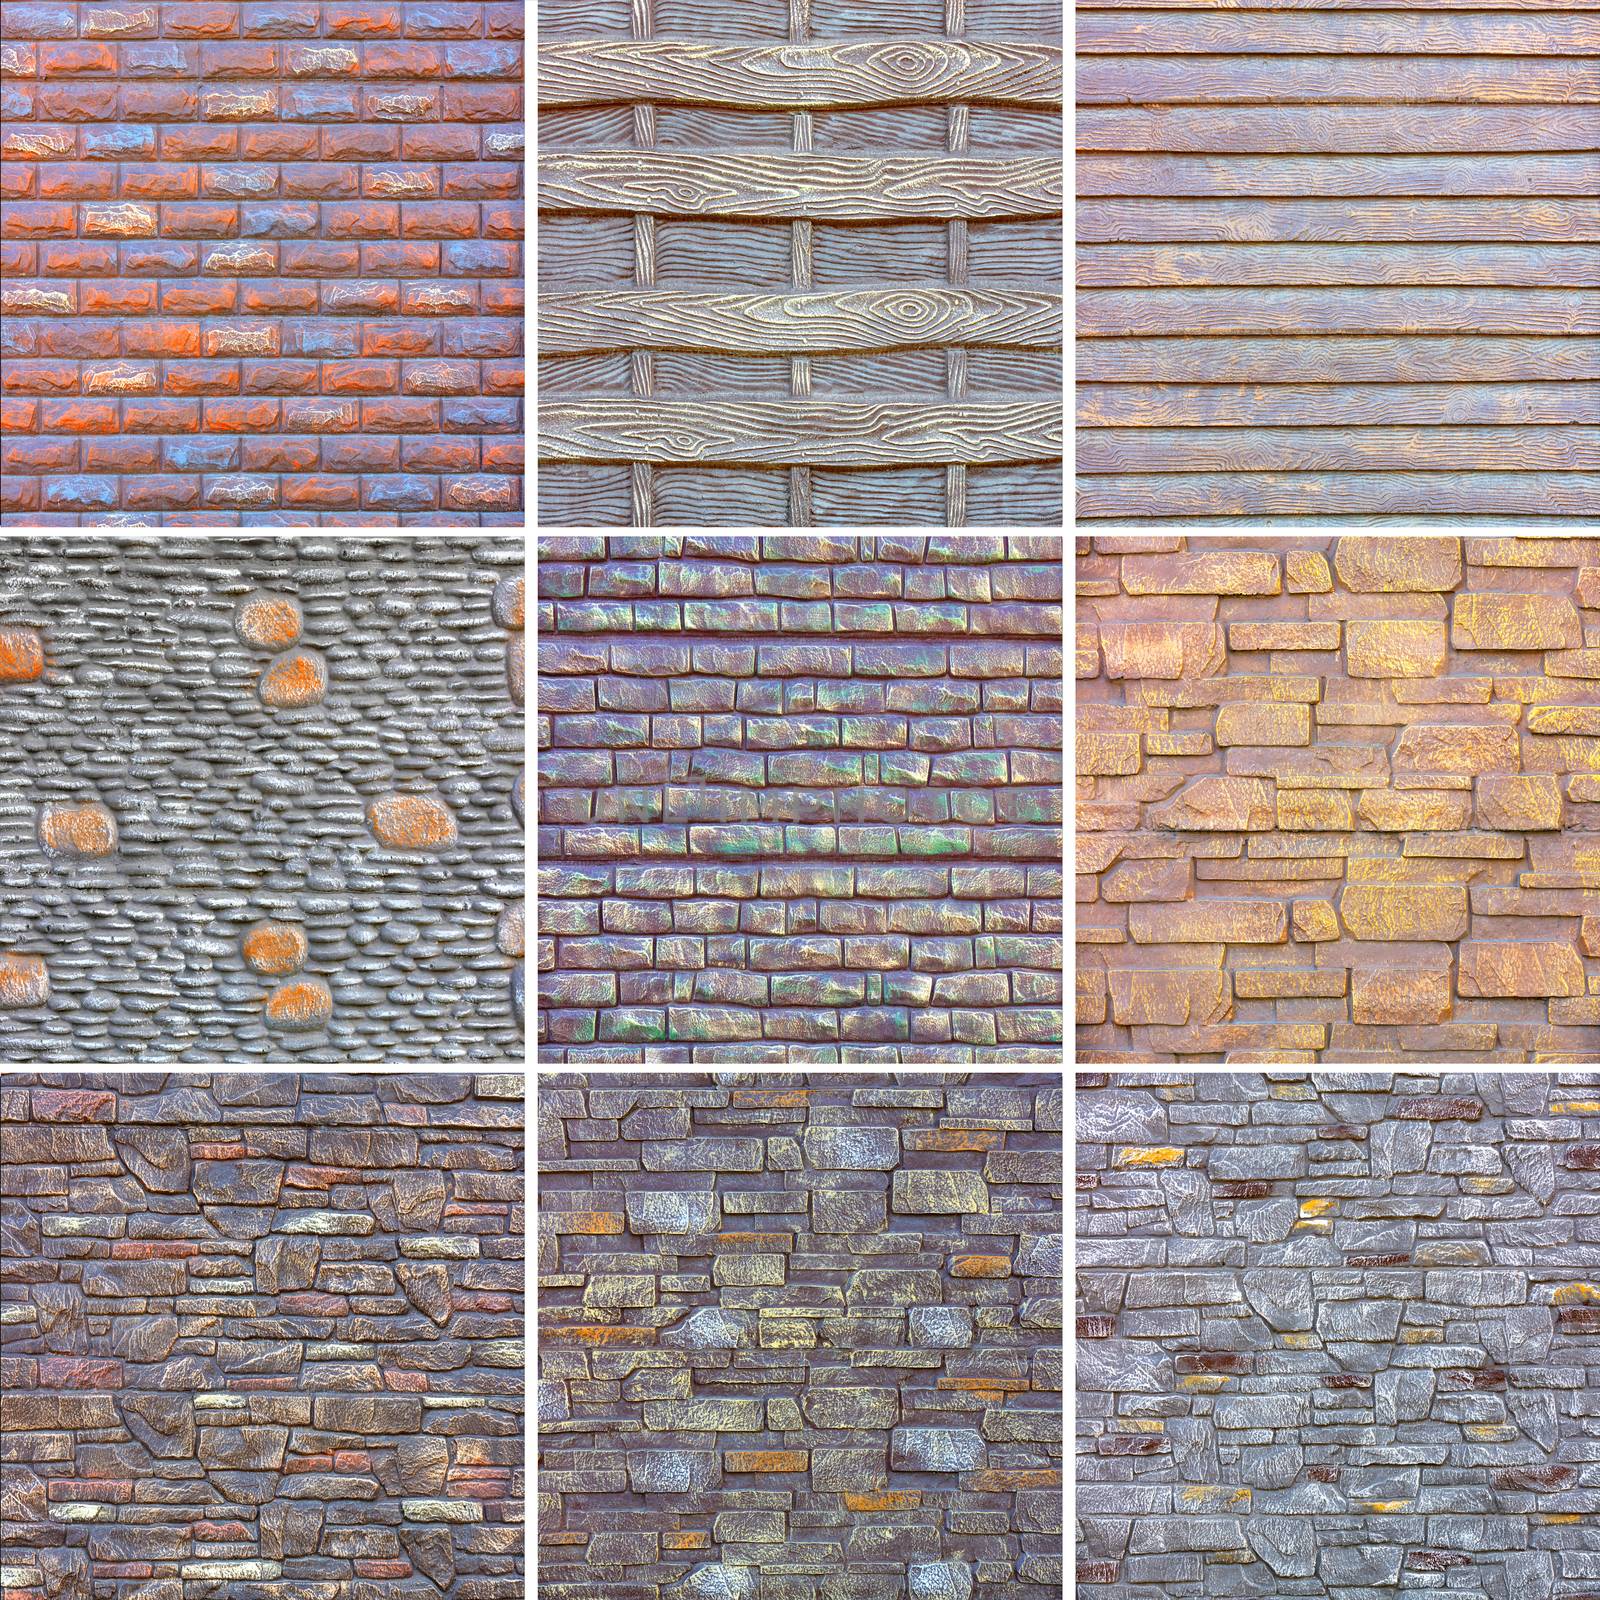 Collage of various square stone and concrete textures for decorative outdoor decoration. High resolution textures, close-up, copy space.